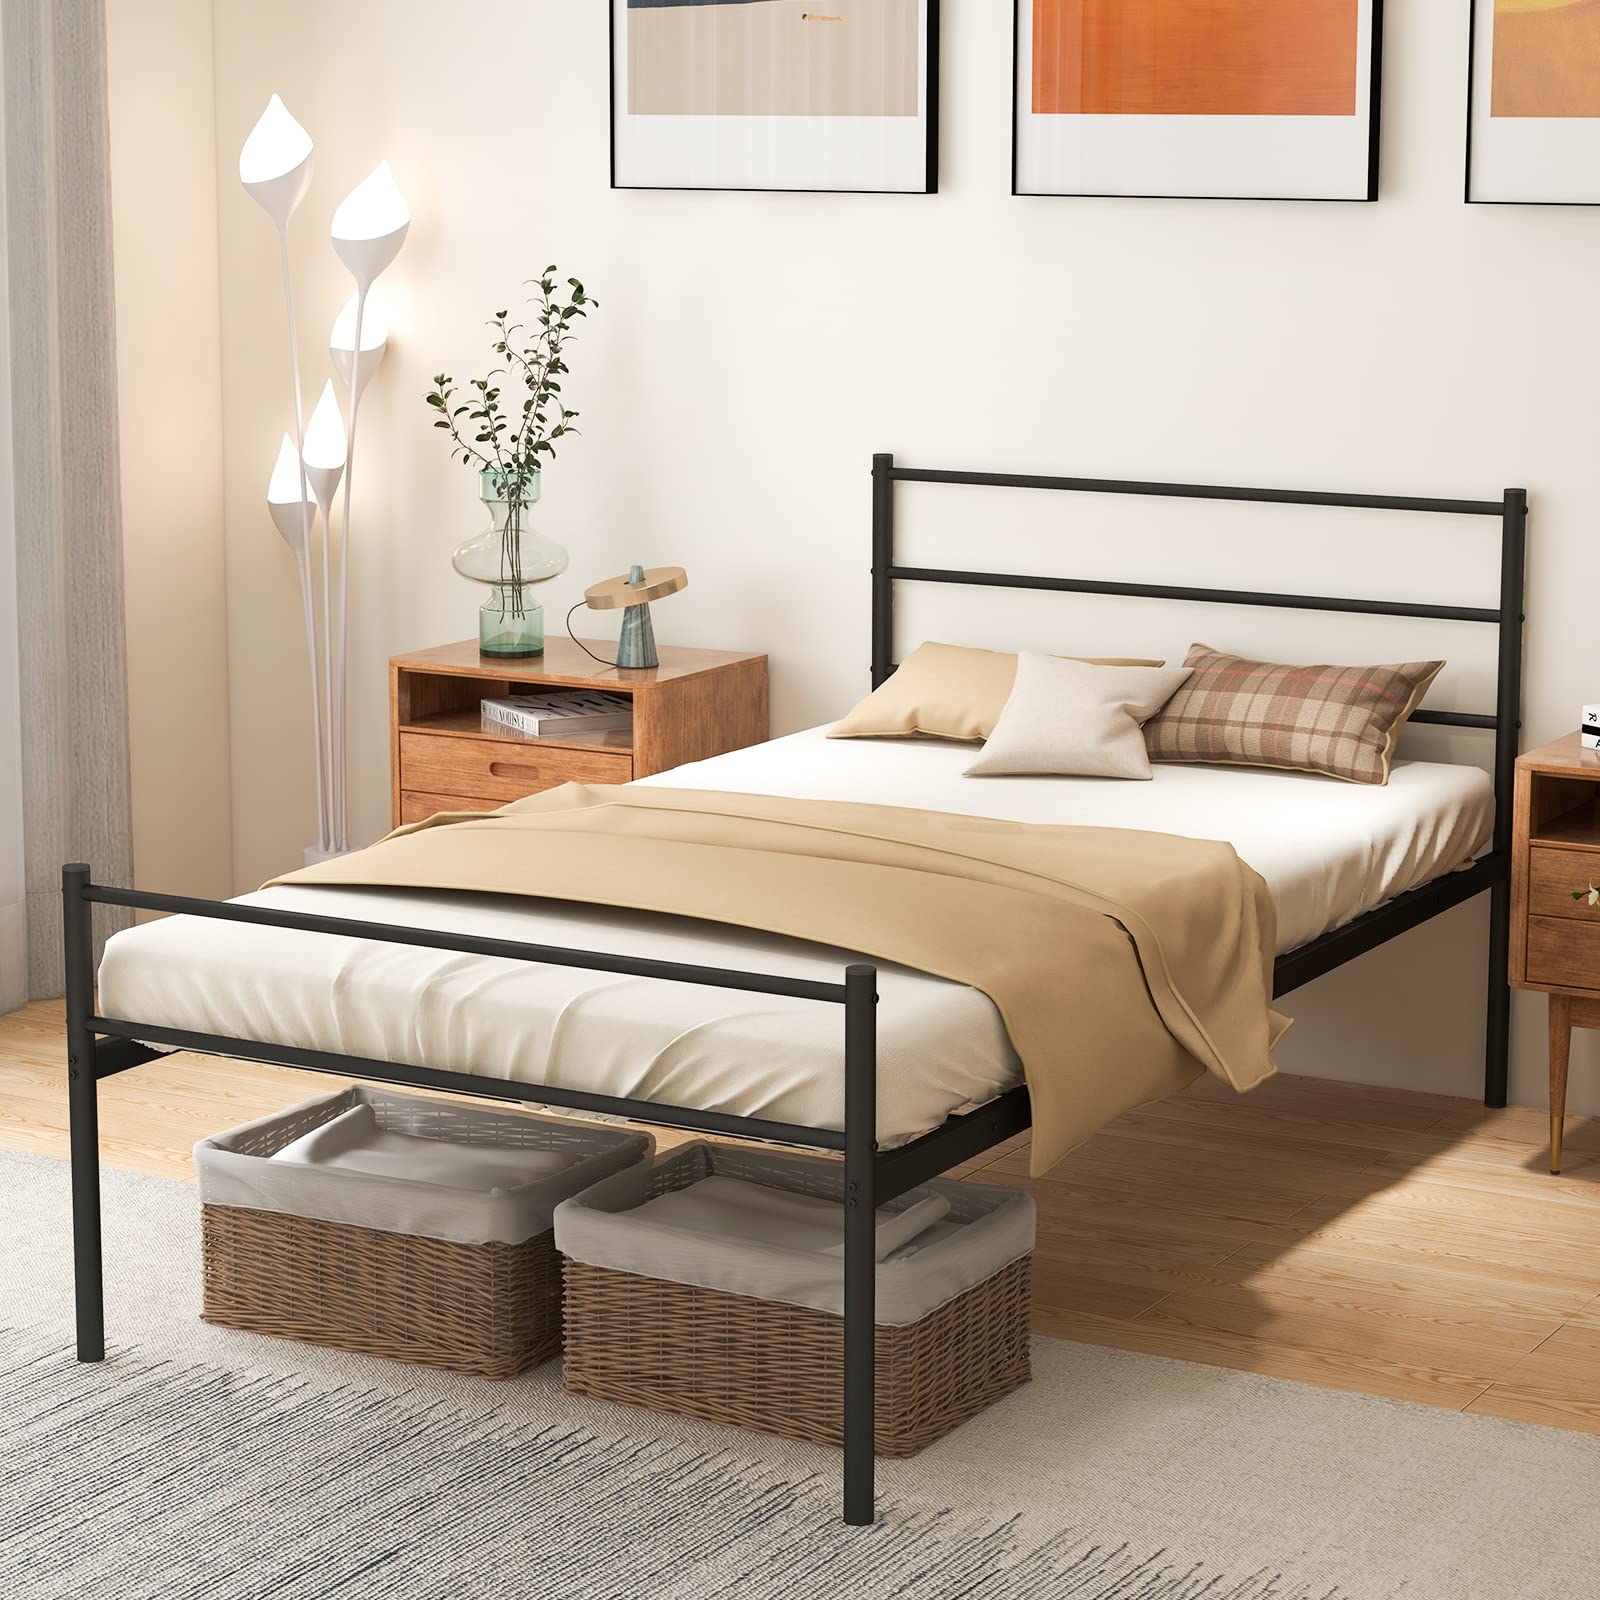 Giantex Twin Size Metal Bed Frame with Headboard & Footboard, 13.5 Inch Platform Bed Frame